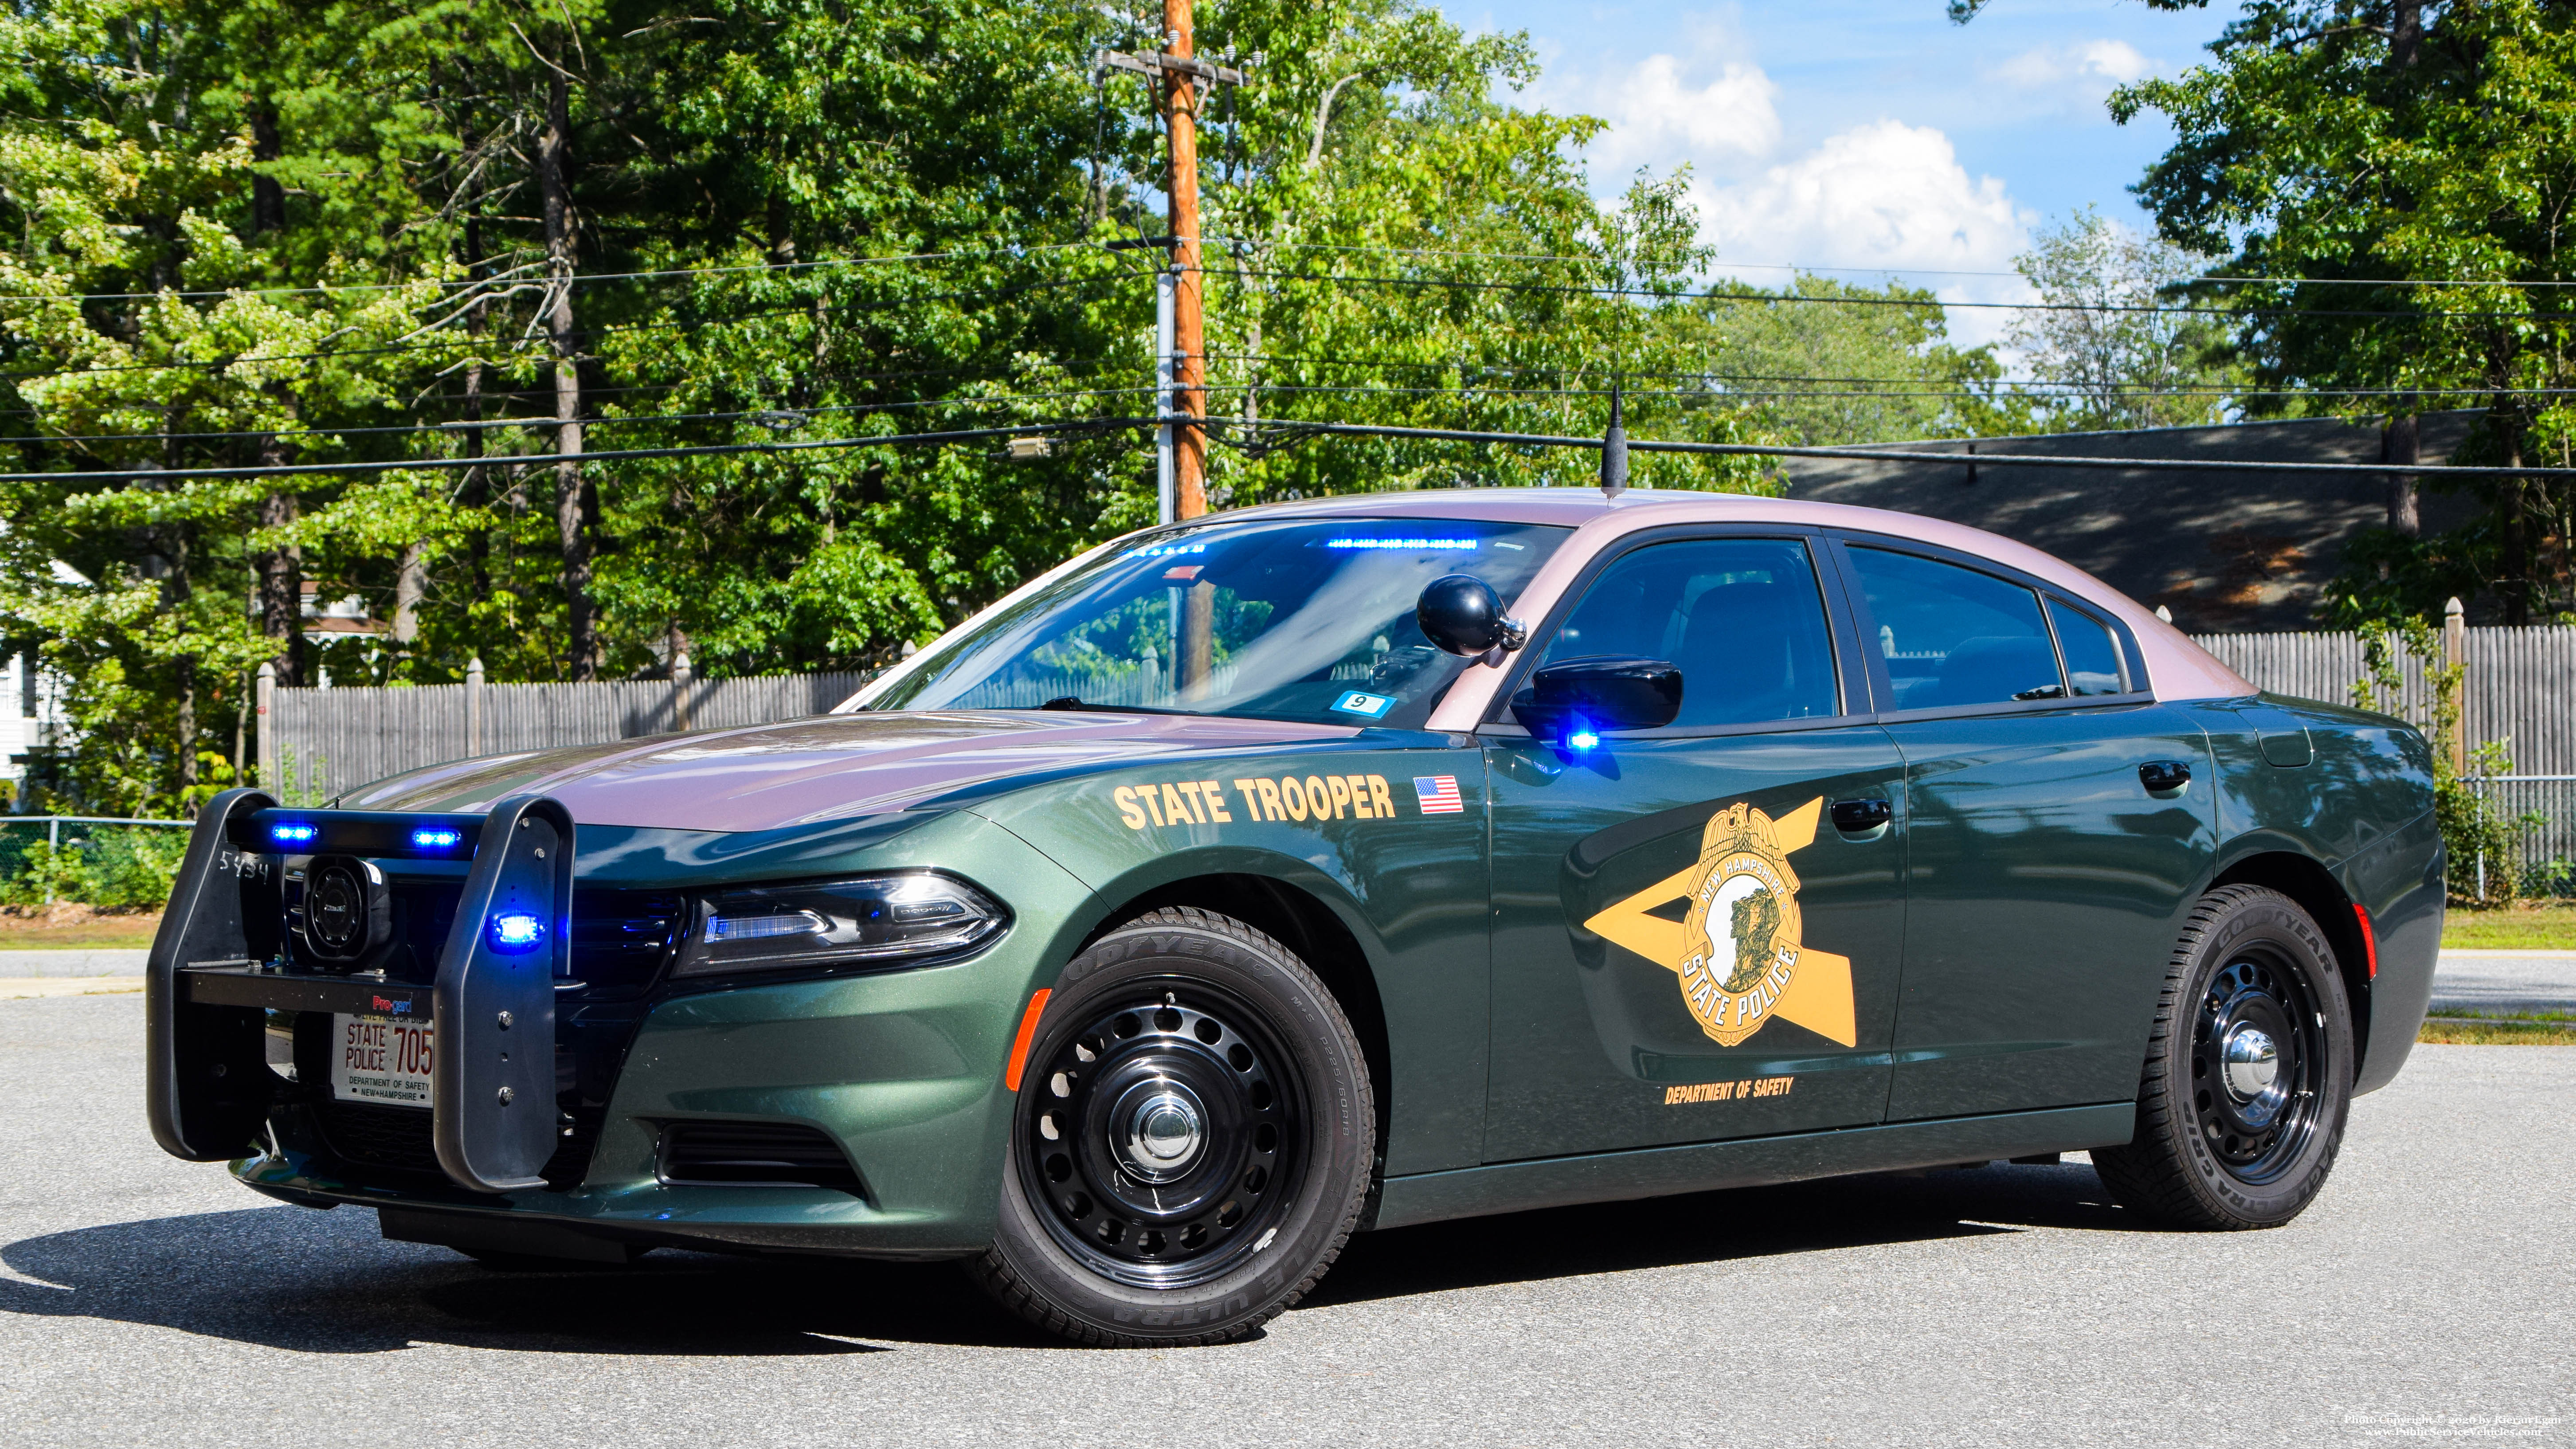 A photo  of New Hampshire State Police
            Cruiser 705, a 2019 Dodge Charger             taken by Kieran Egan